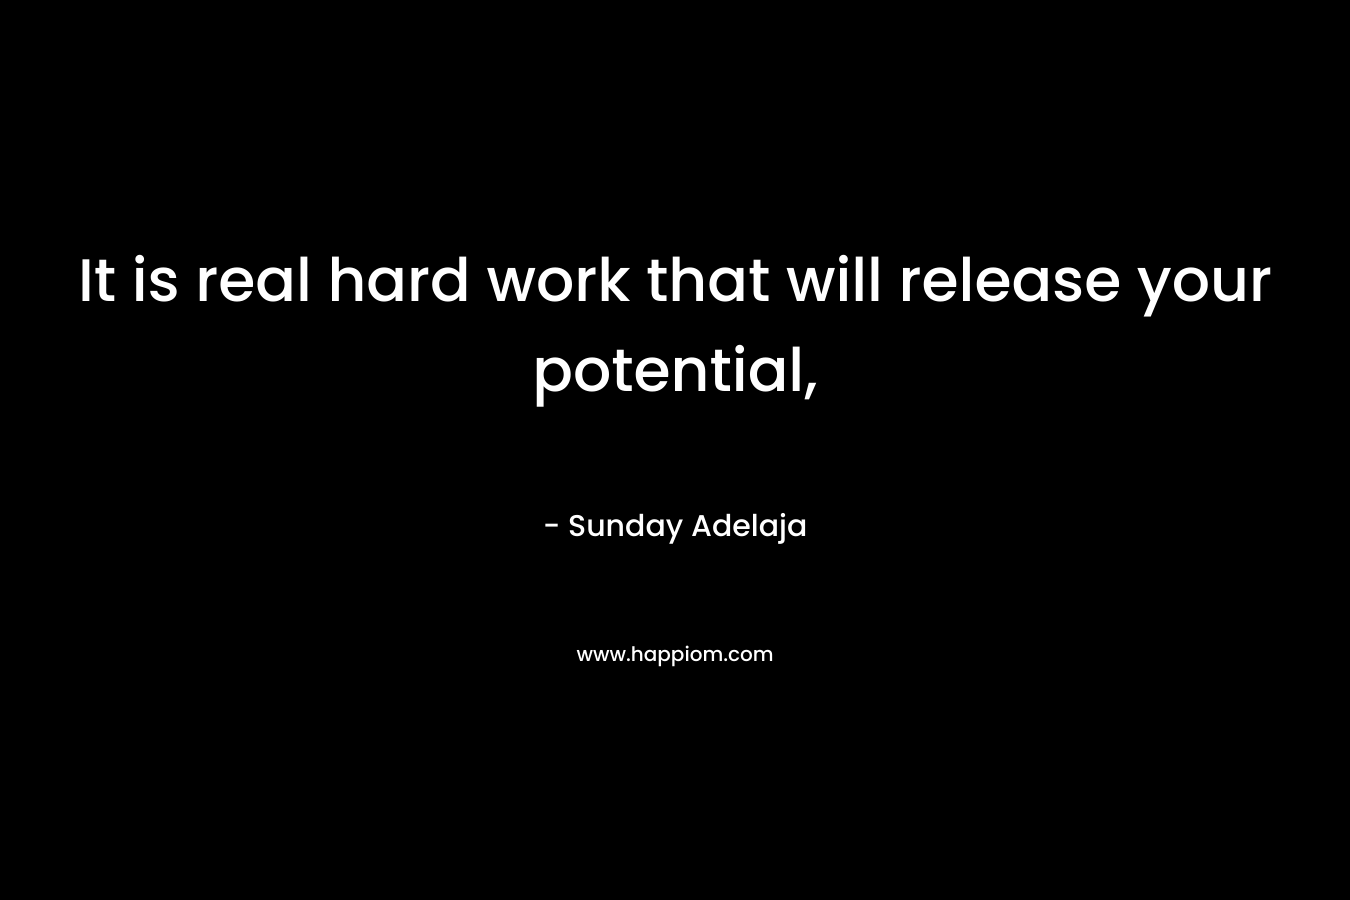 It is real hard work that will release your potential,